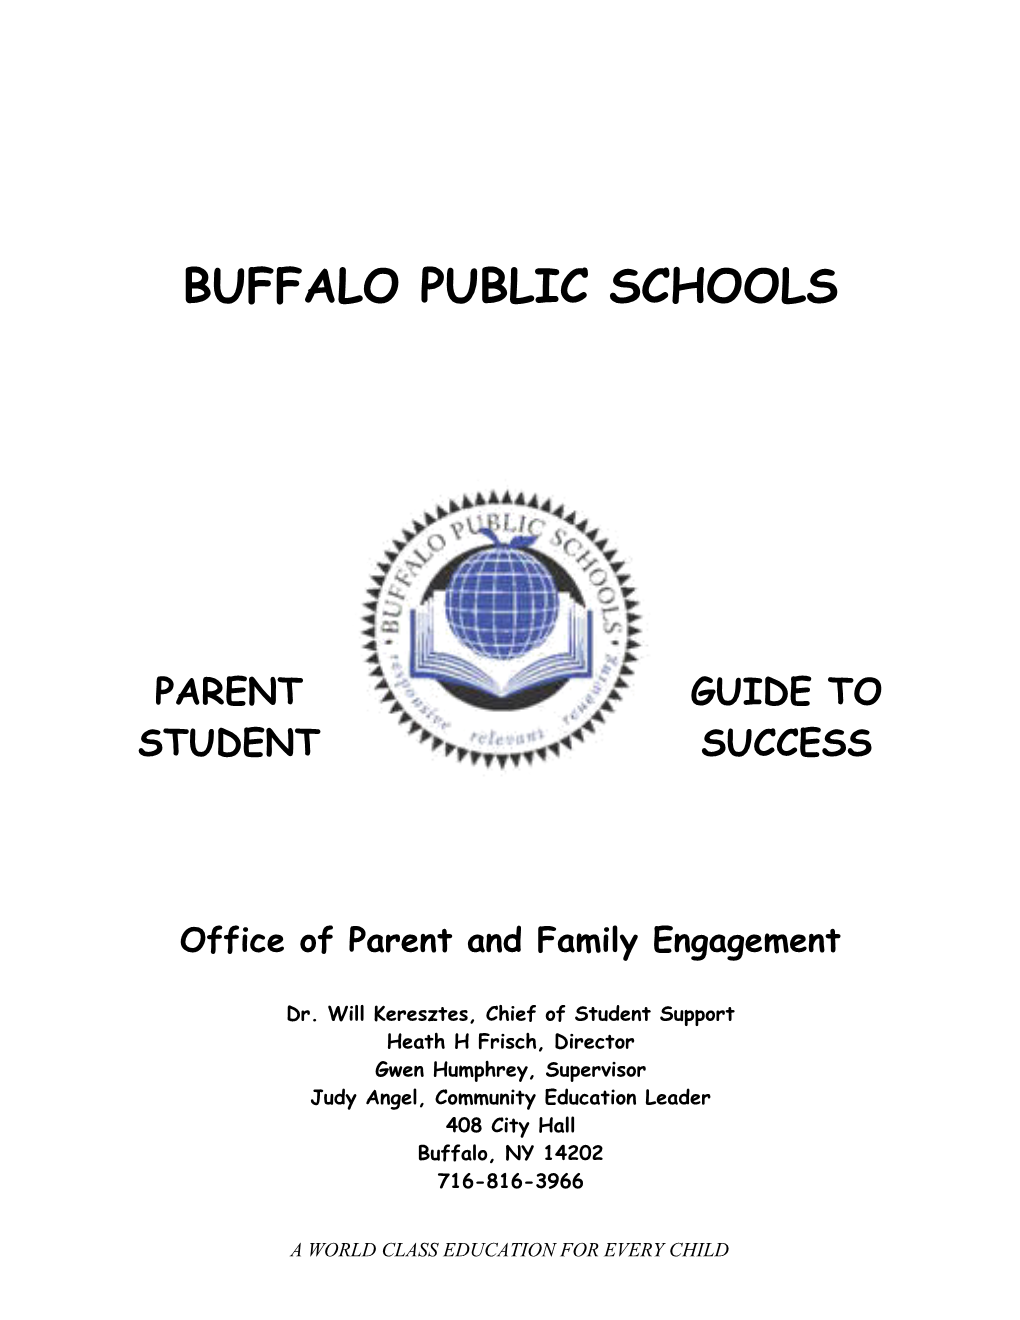 Parent Guide to Student Success